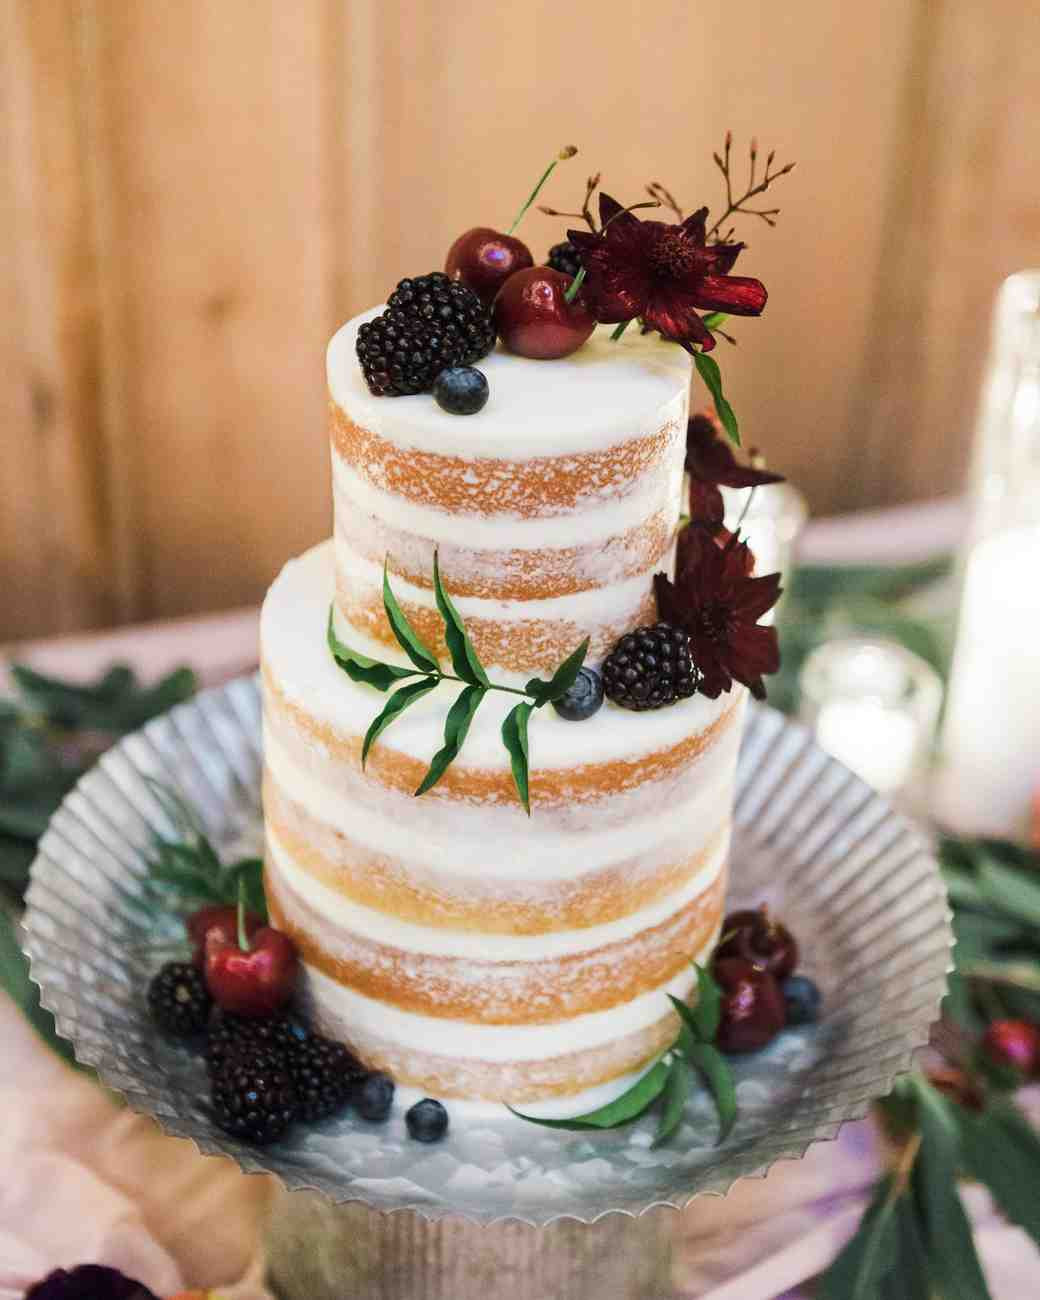 Rustic Country Wedding Cakes
 30 Rustic Wedding Cakes We re Loving